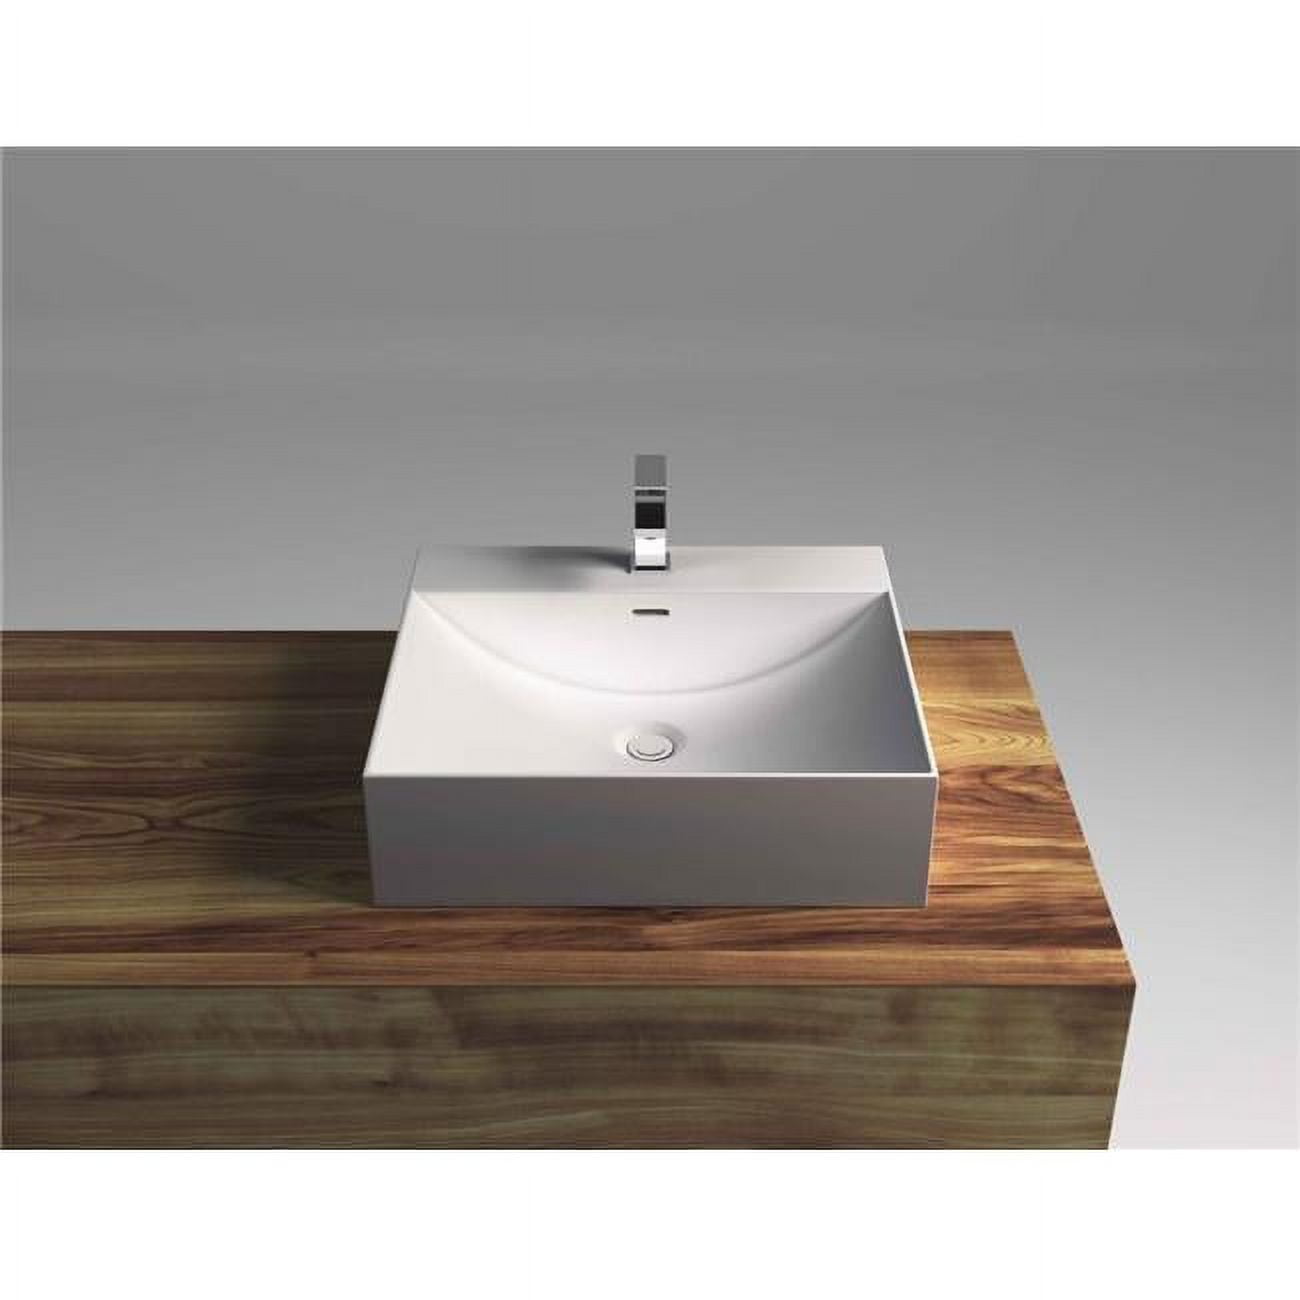 St-1916 Solid Surface Coutertop Basin With Overflow